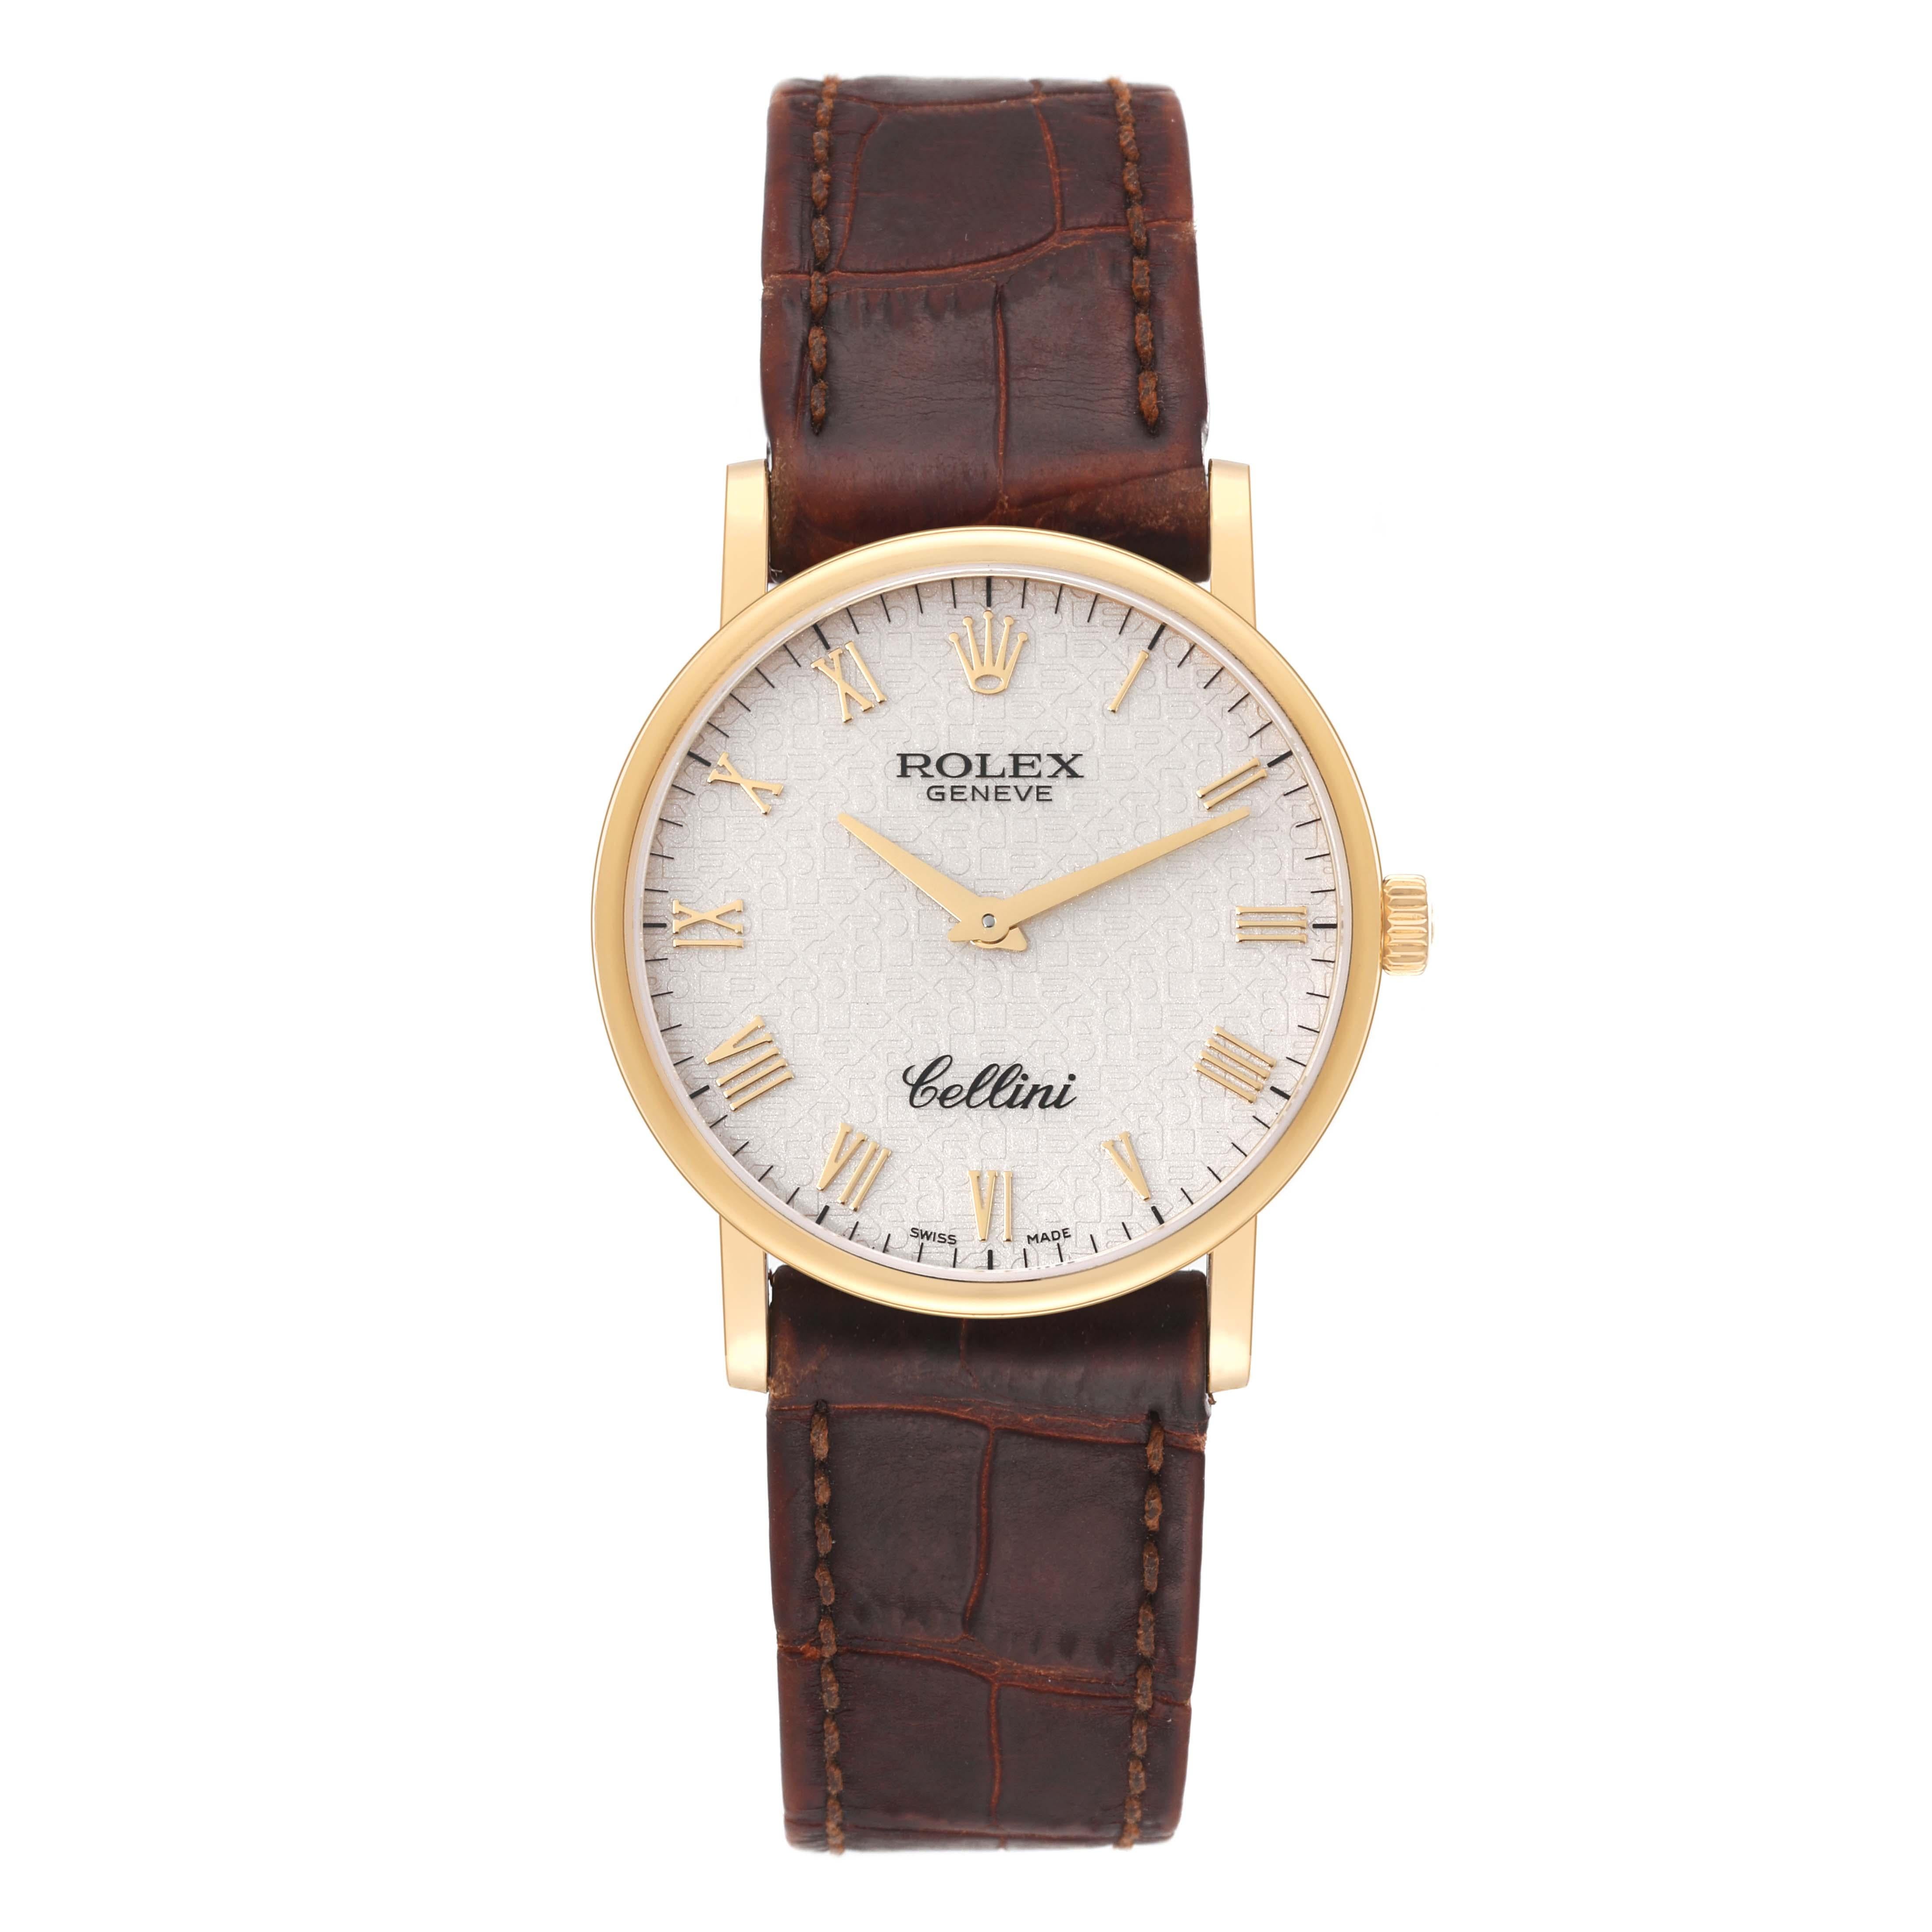 Rolex Cellini Classic Yellow Gold Ivory Anniversary Dial Mens Watch 5115 Card. Manual winding movement. 18K yellow gold slim case 32mm in diameter. 5.5mm case thickness. Rolex logo on the crown. . Scratch resistant sapphire crystal. Flat profile.